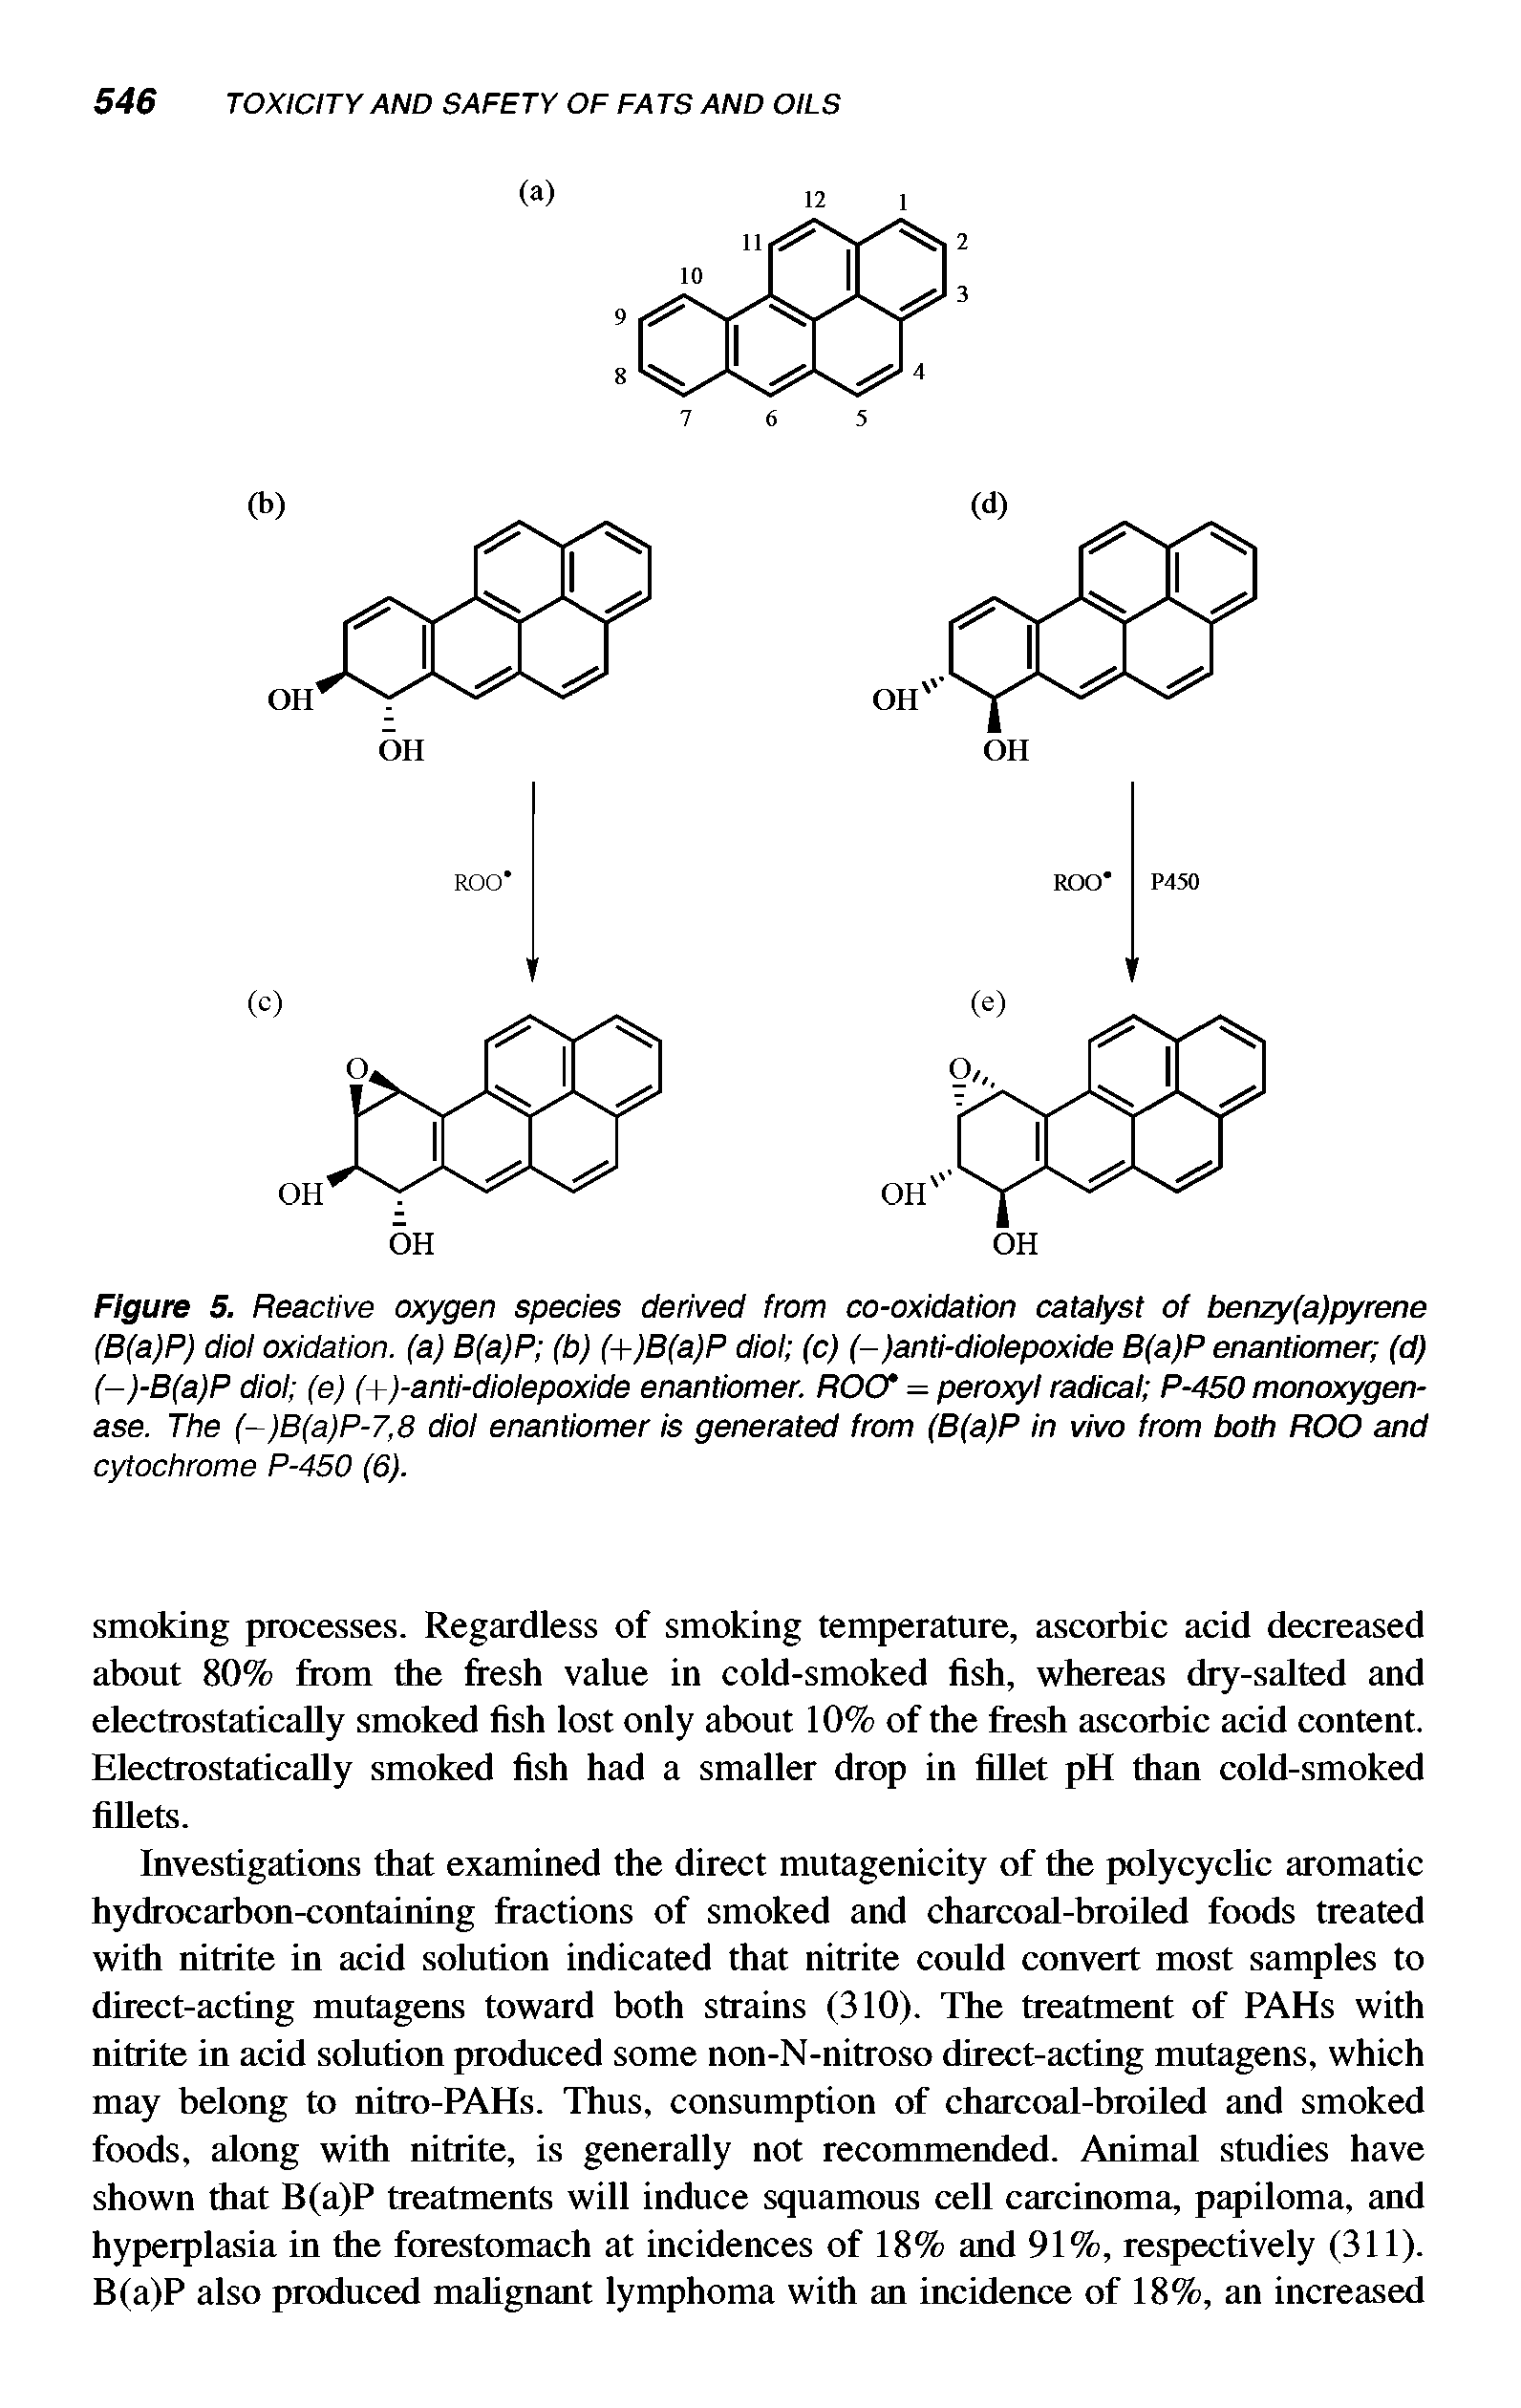 Figure 5. Reactive oxygen species derived from co-oxidation catalyst of benzy(a)pyrene (B(a)P) diol oxidation, (a) B(a)P (b) (+)B(a)P diol (c) (-)anti-diolepoxide B(a)P enantiomer (d) (-)-B(a)P diol (e) (+)-anti-diolepoxide enantiomer. ROCf = peroxyl radical P-450 monoxygenase. The ( )B(a)P-7,8 diol enantiomer is generated from (B(a)P in vivo from both ROO and...